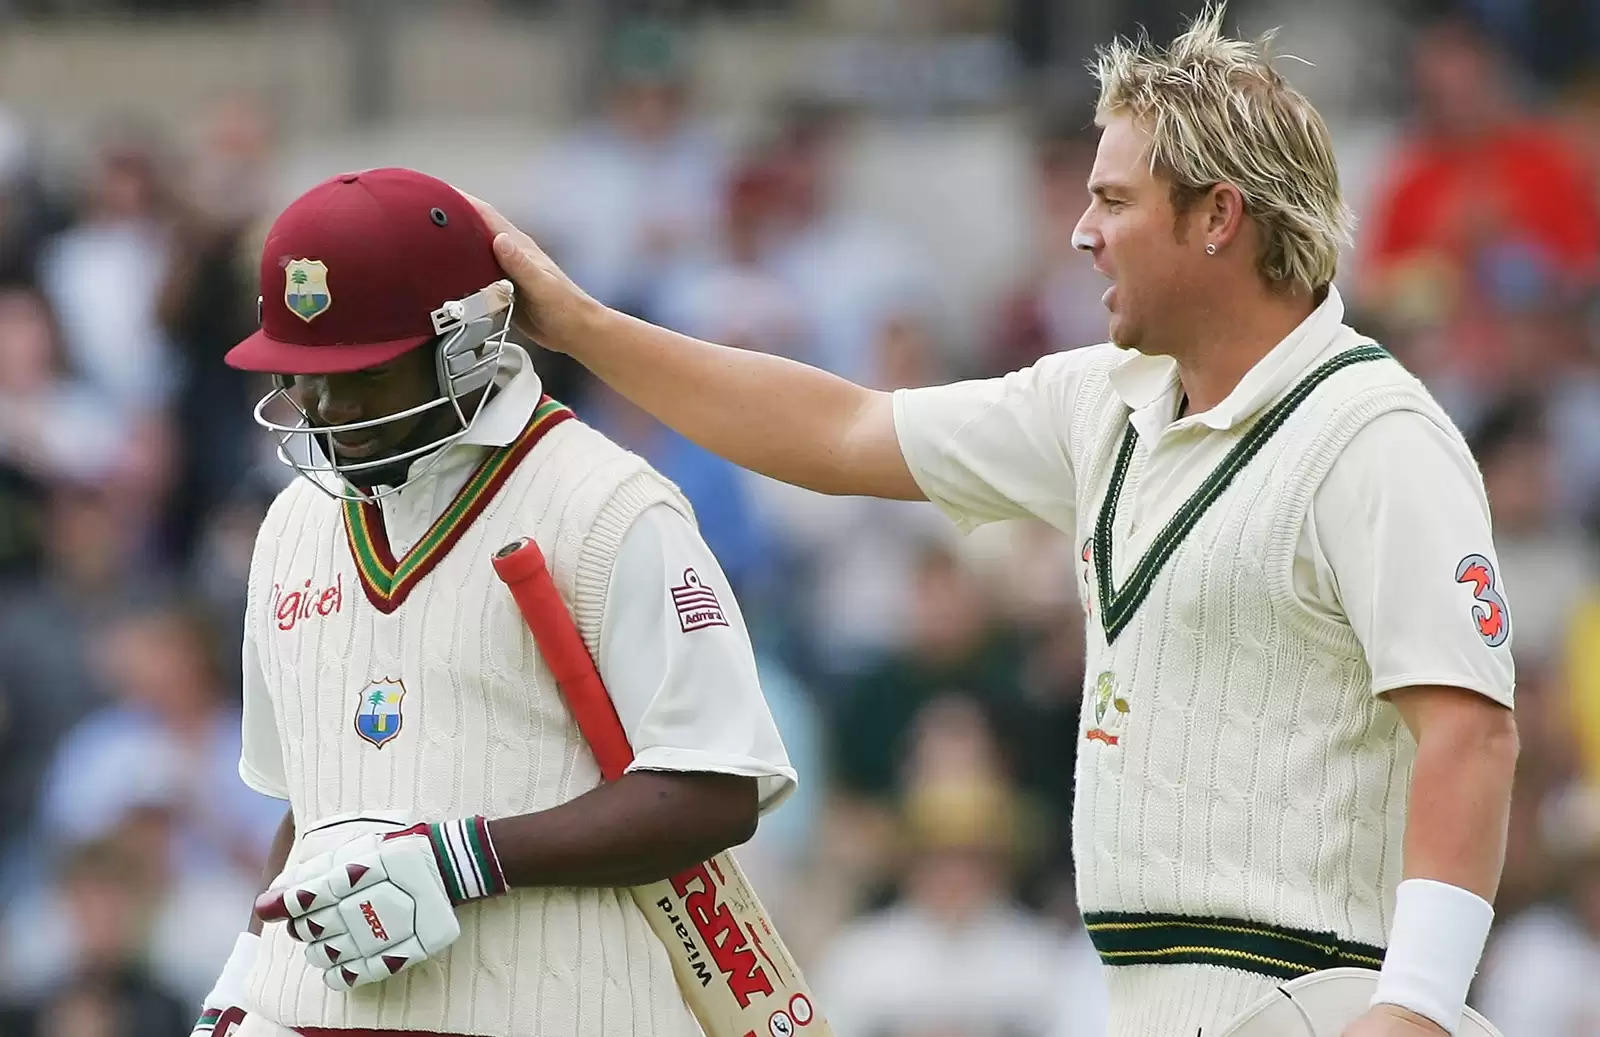 Deprived of a crown, worshipped by masses – Chronicles of a King named Brian Lara